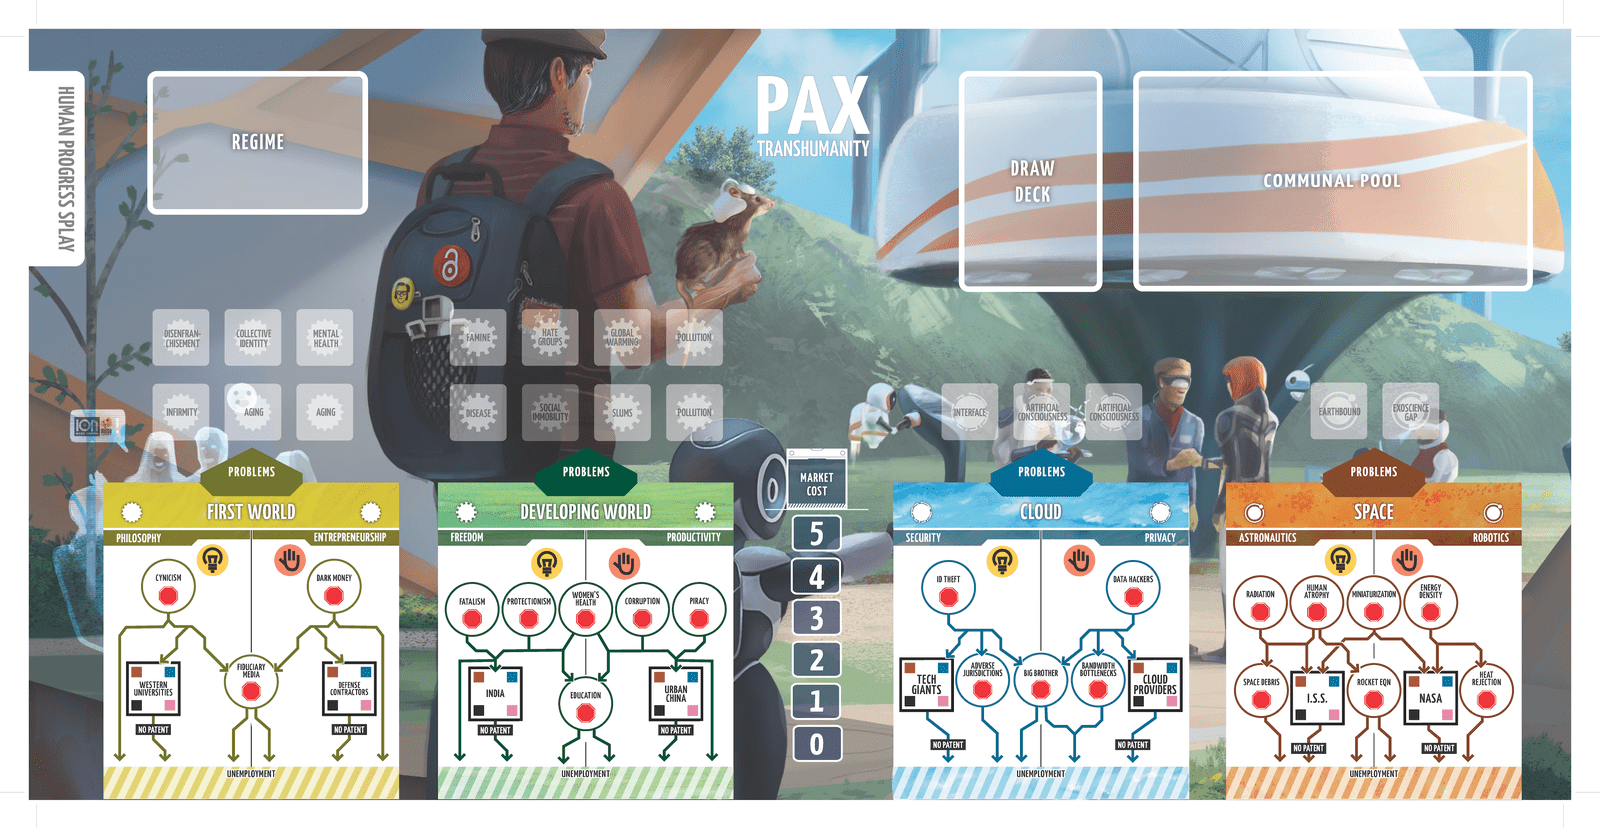 PAX Porfiriana / PAX Transhumanity Folding Game Board - Side of the game board that can be used for PAX transhumanity